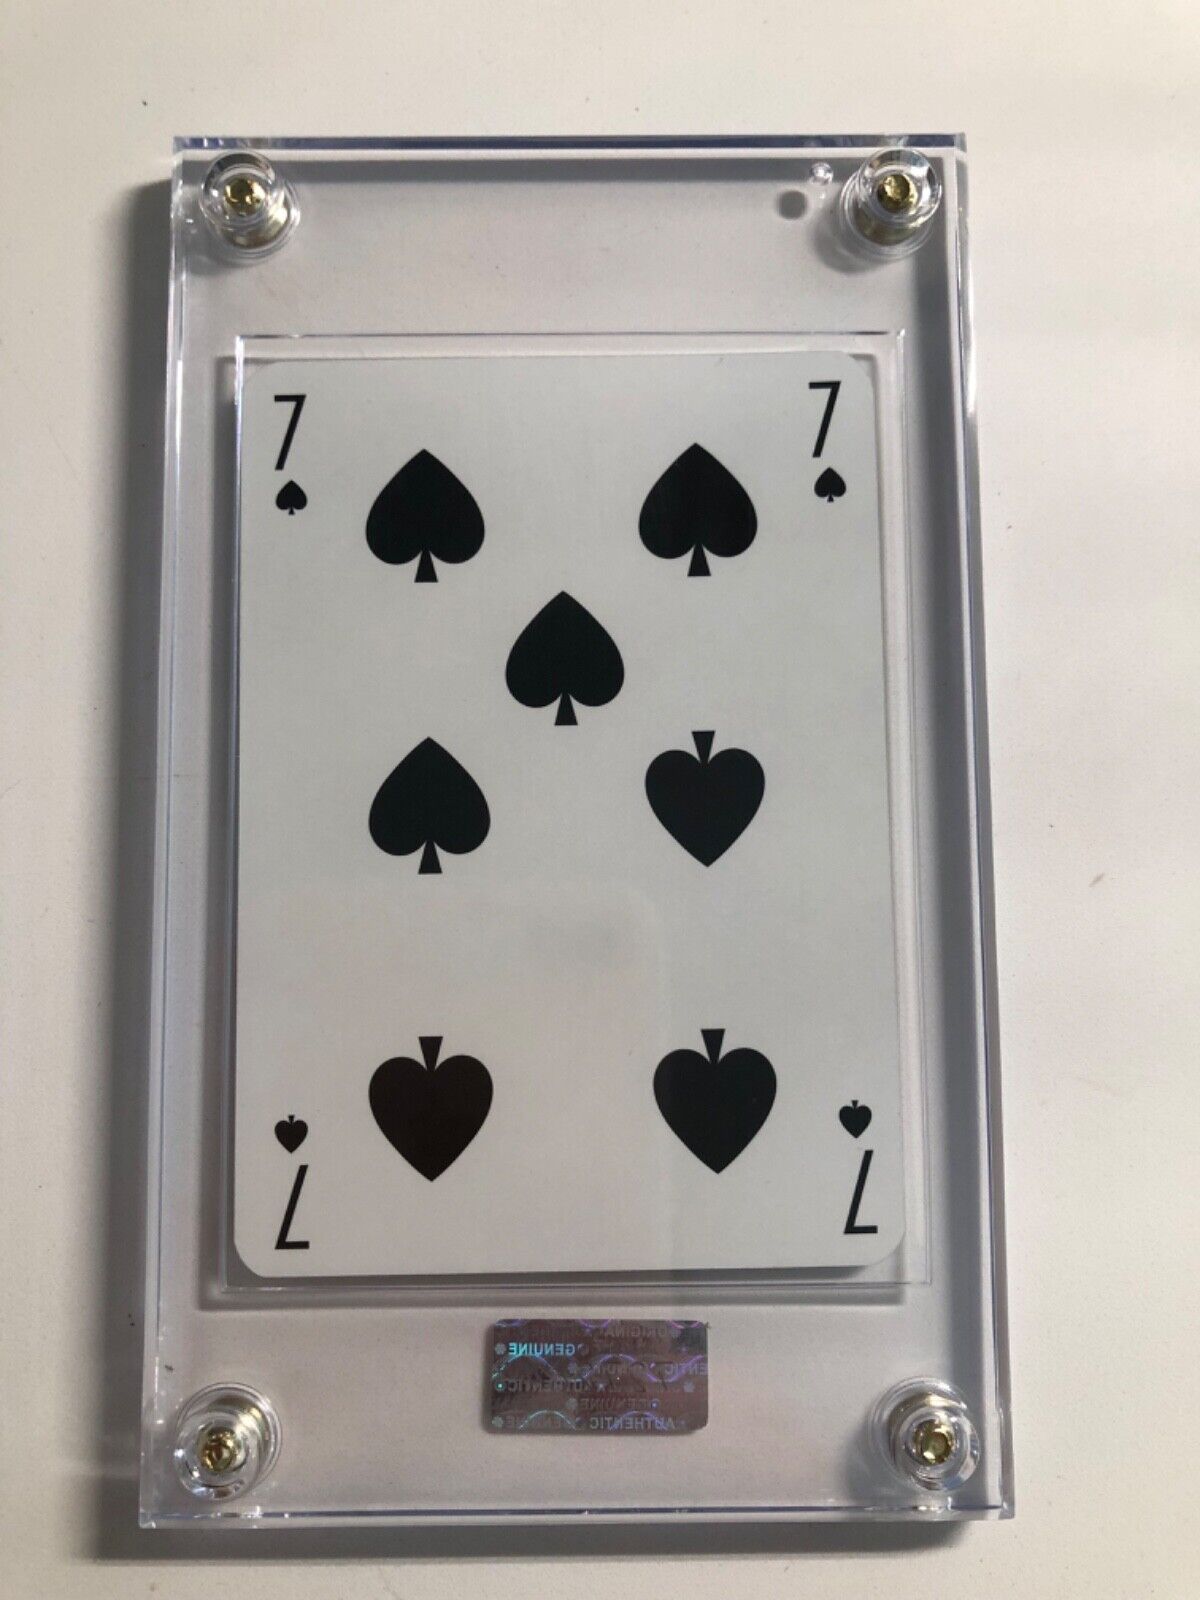 Auth Louis Vuitton Playing Card 5 of Spades Sealed in plastic collectible gift